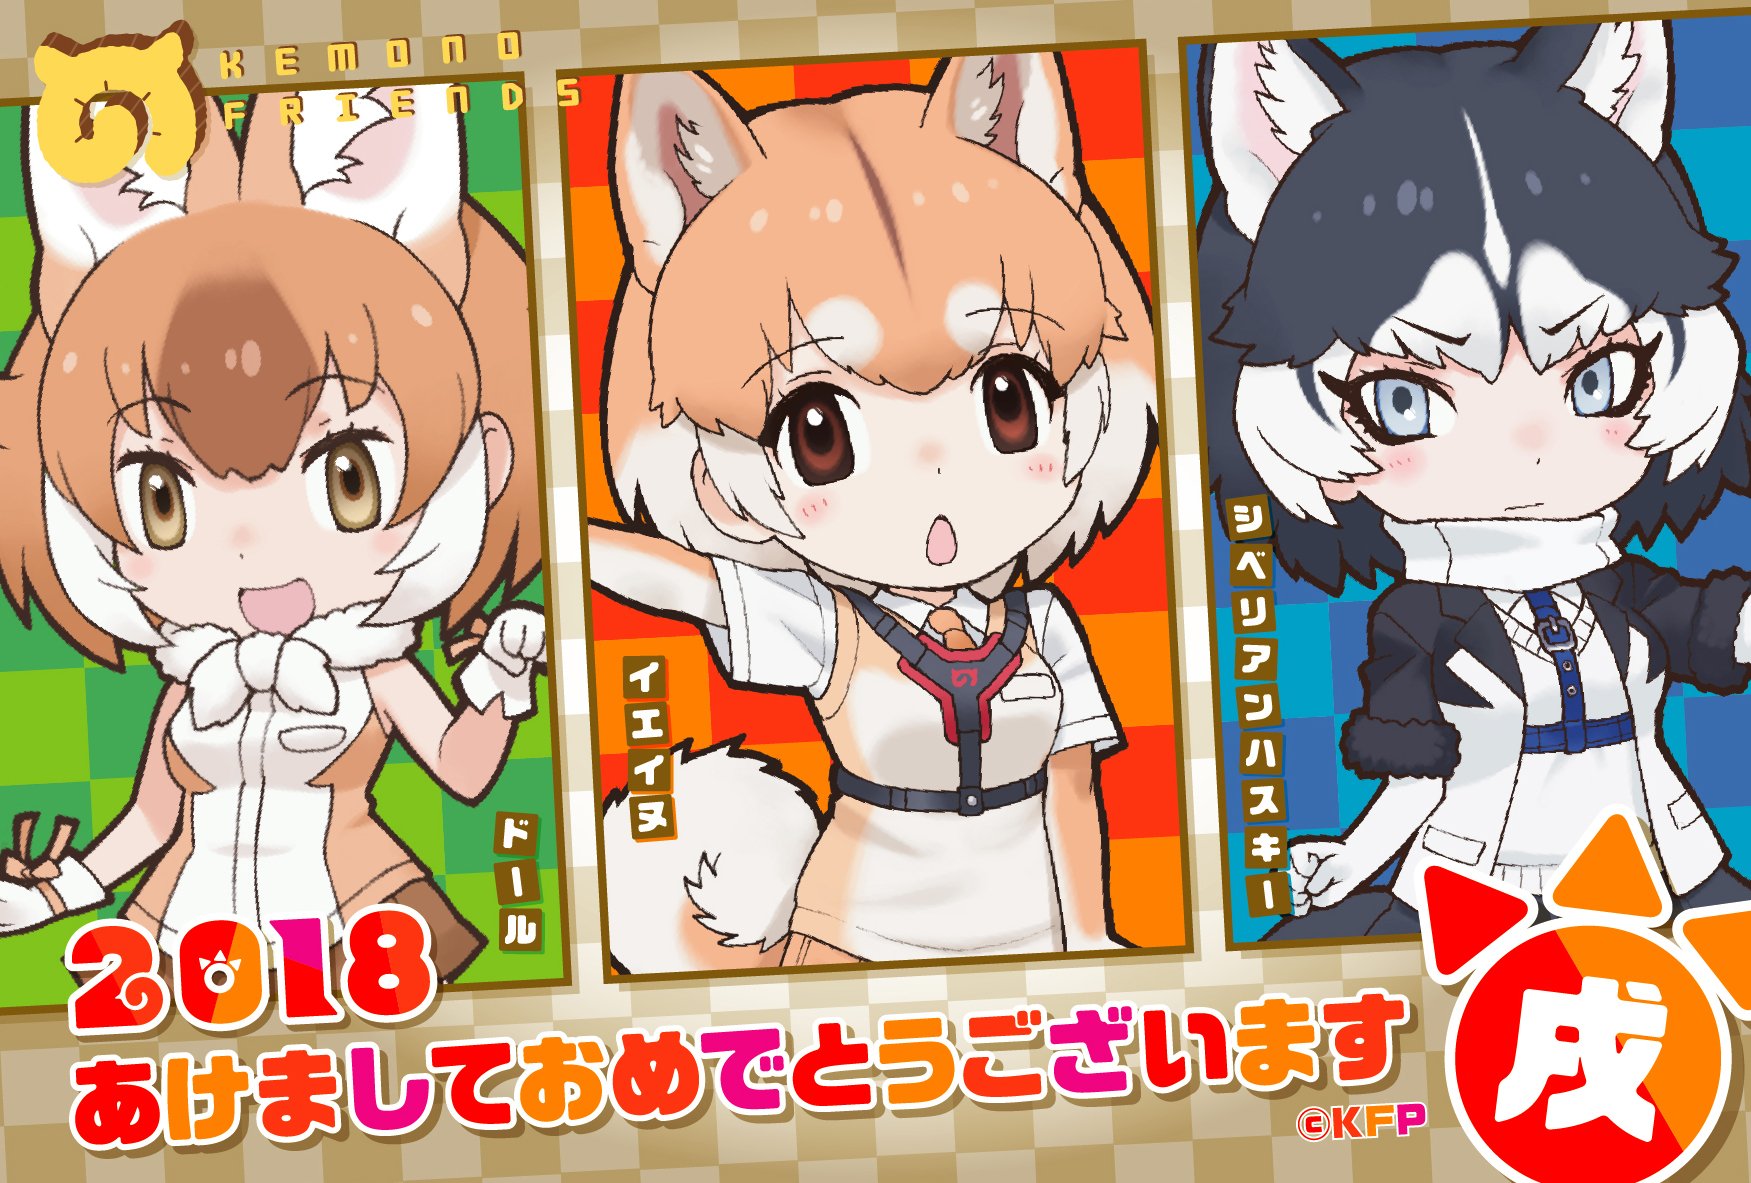 Year of Dog poster posted by Kemono Friends Project Twitter account.